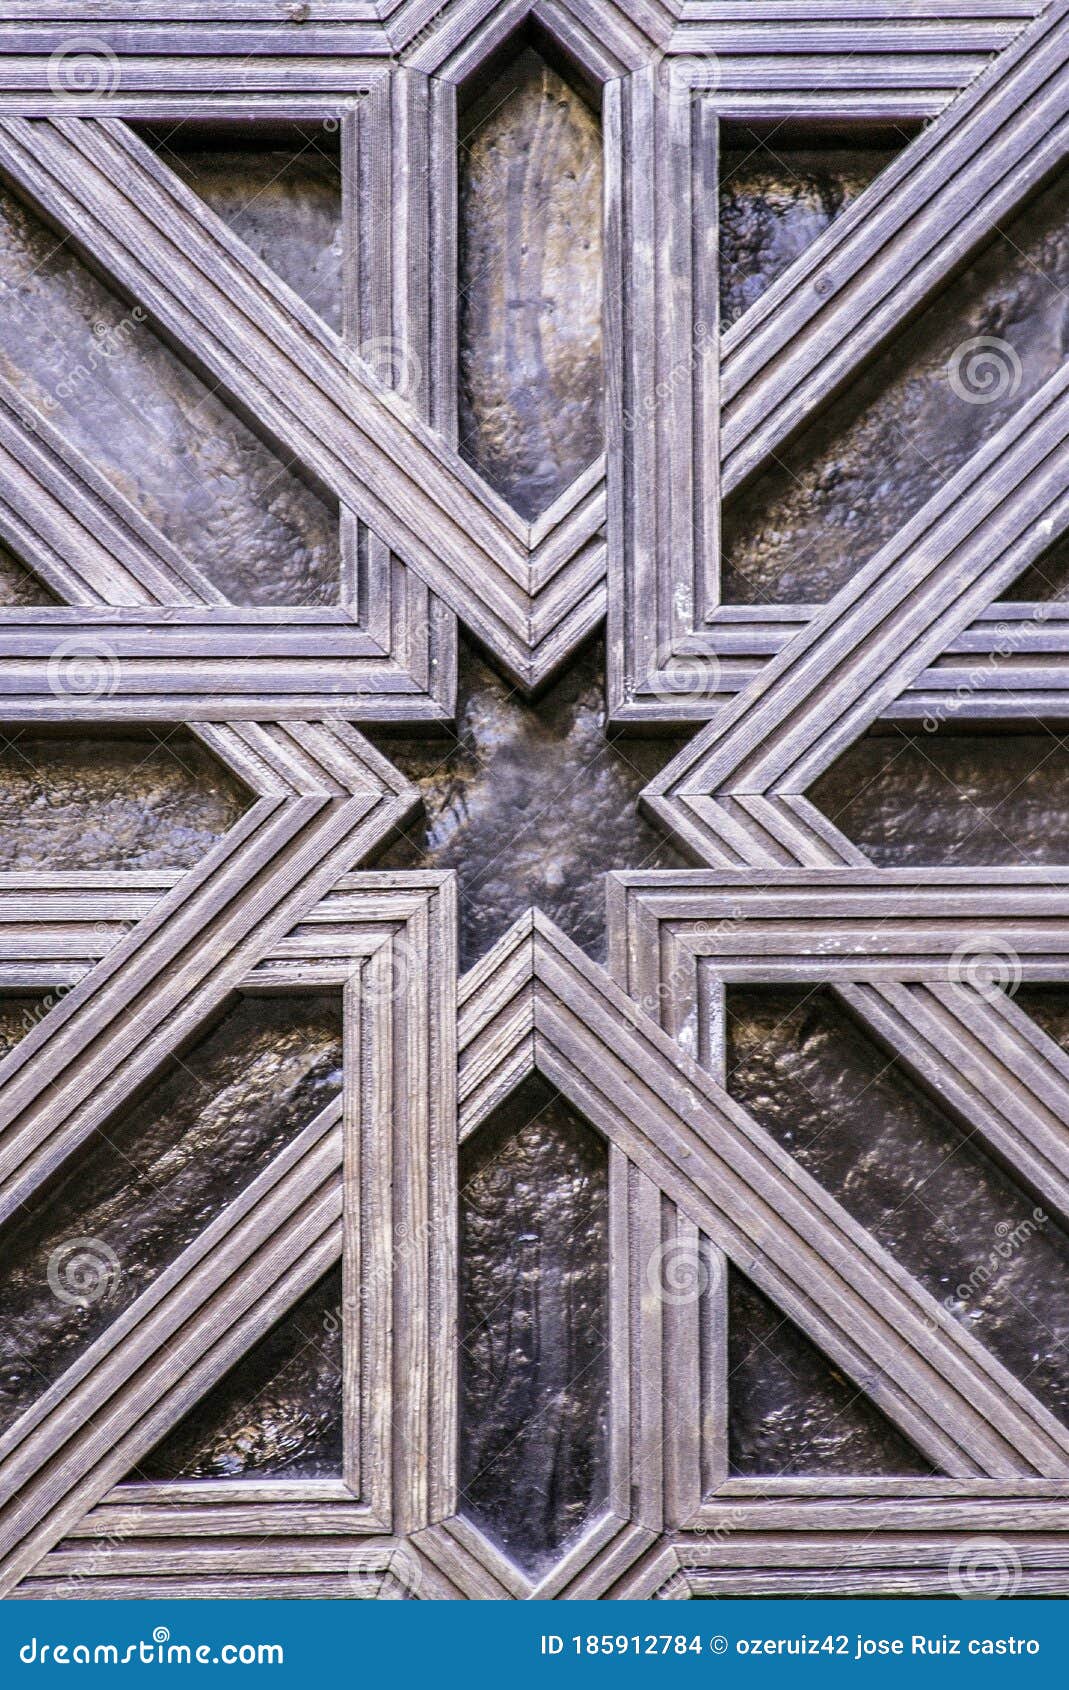 Wooden latticework with a star in the center, detail of the cathedral mosque of Cordoba